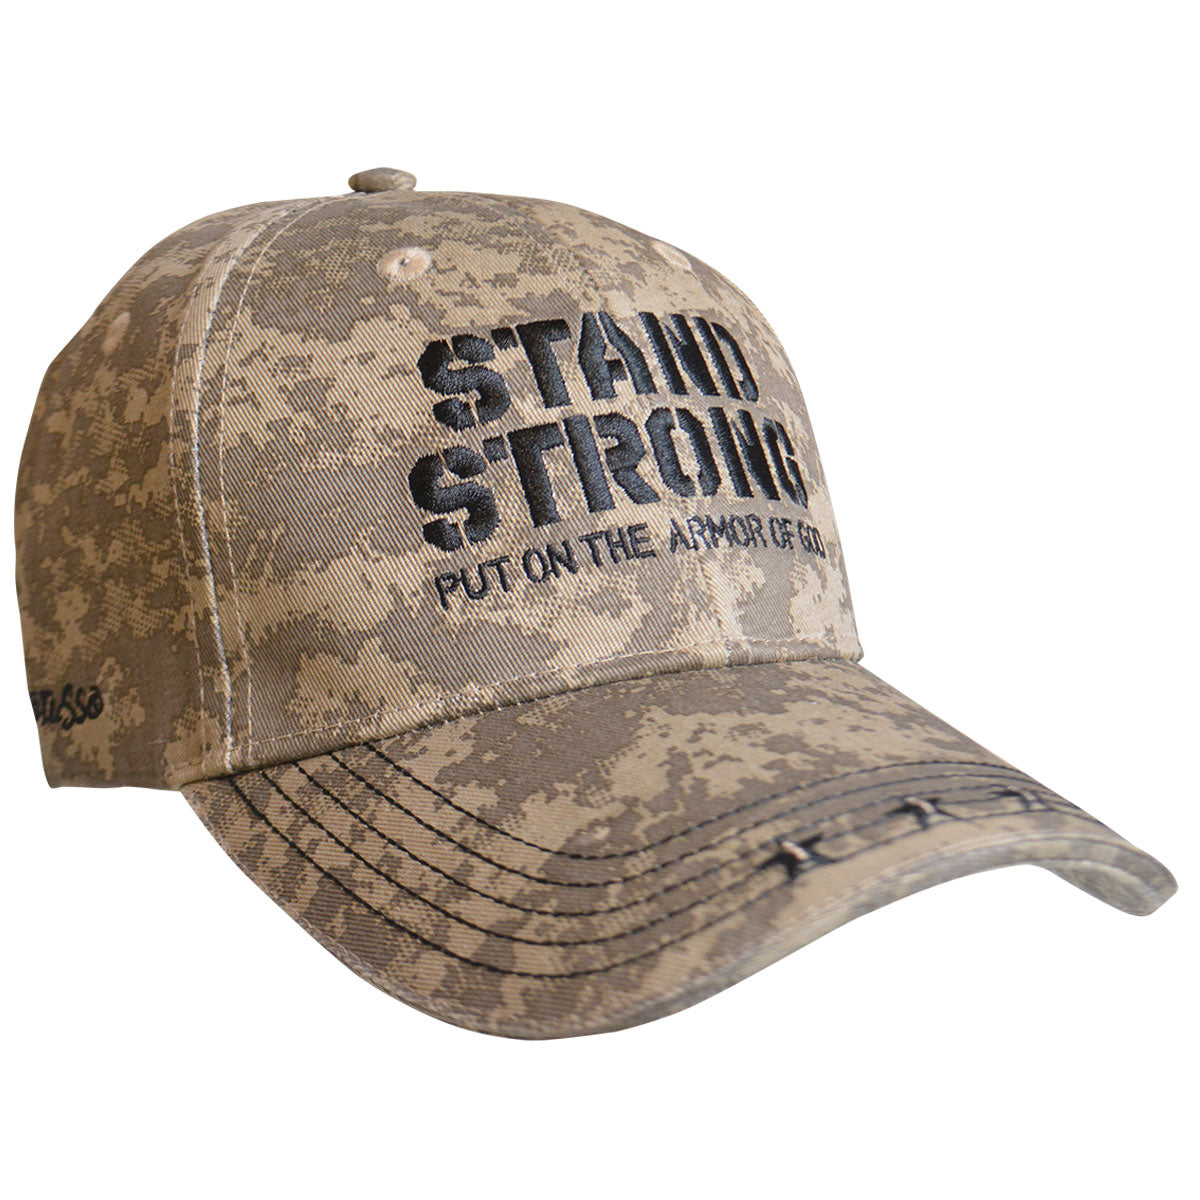 Kerusso Mens Cap Stand Strong